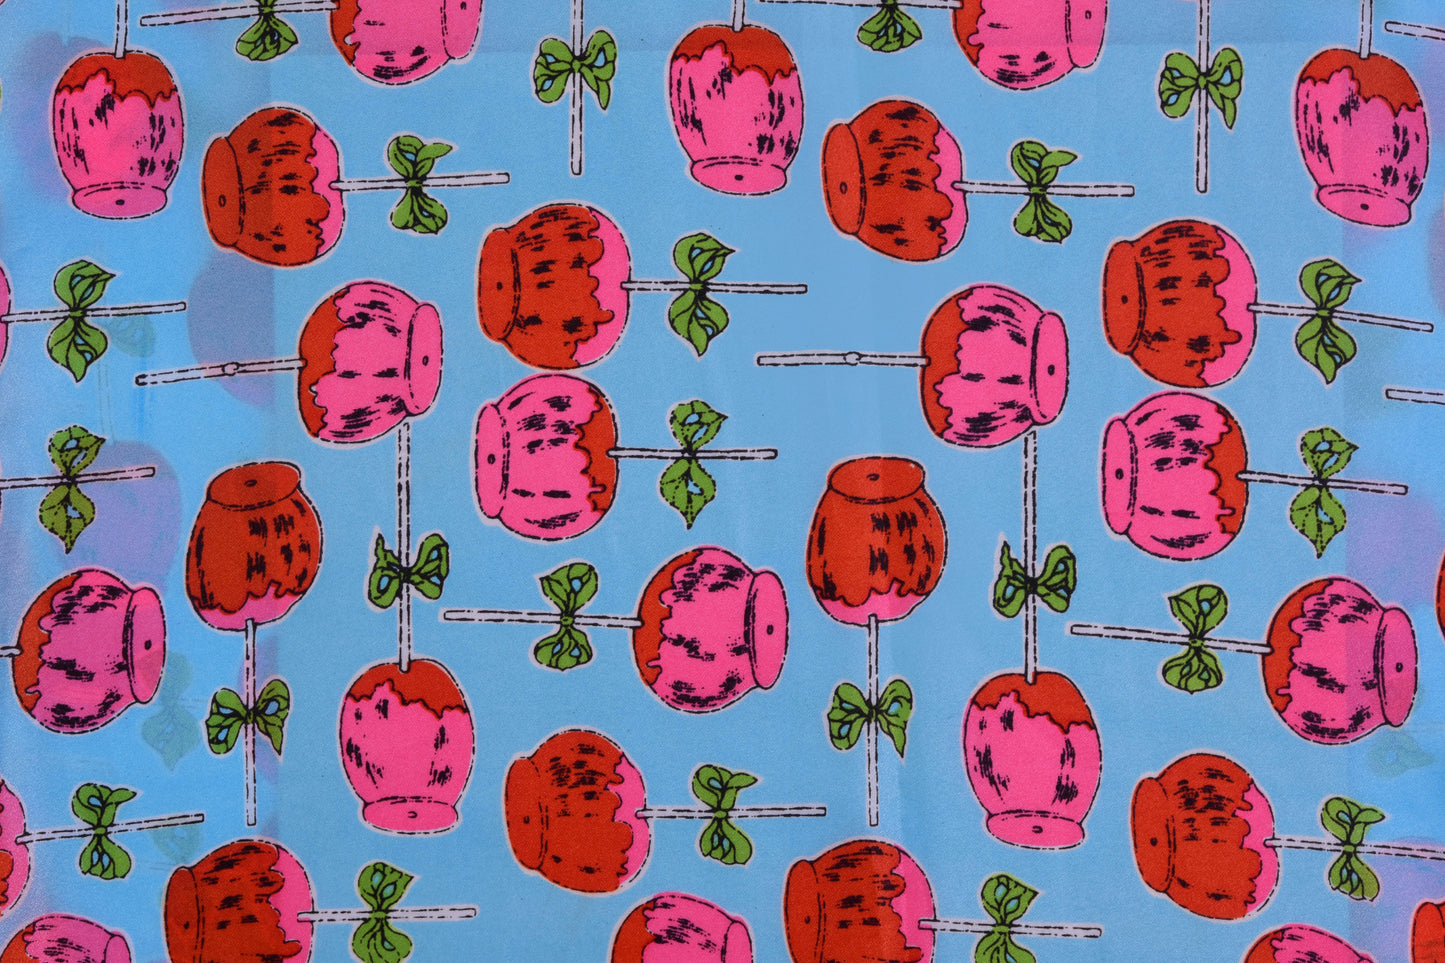 Online Tour - Andy Warhol: The Textiles